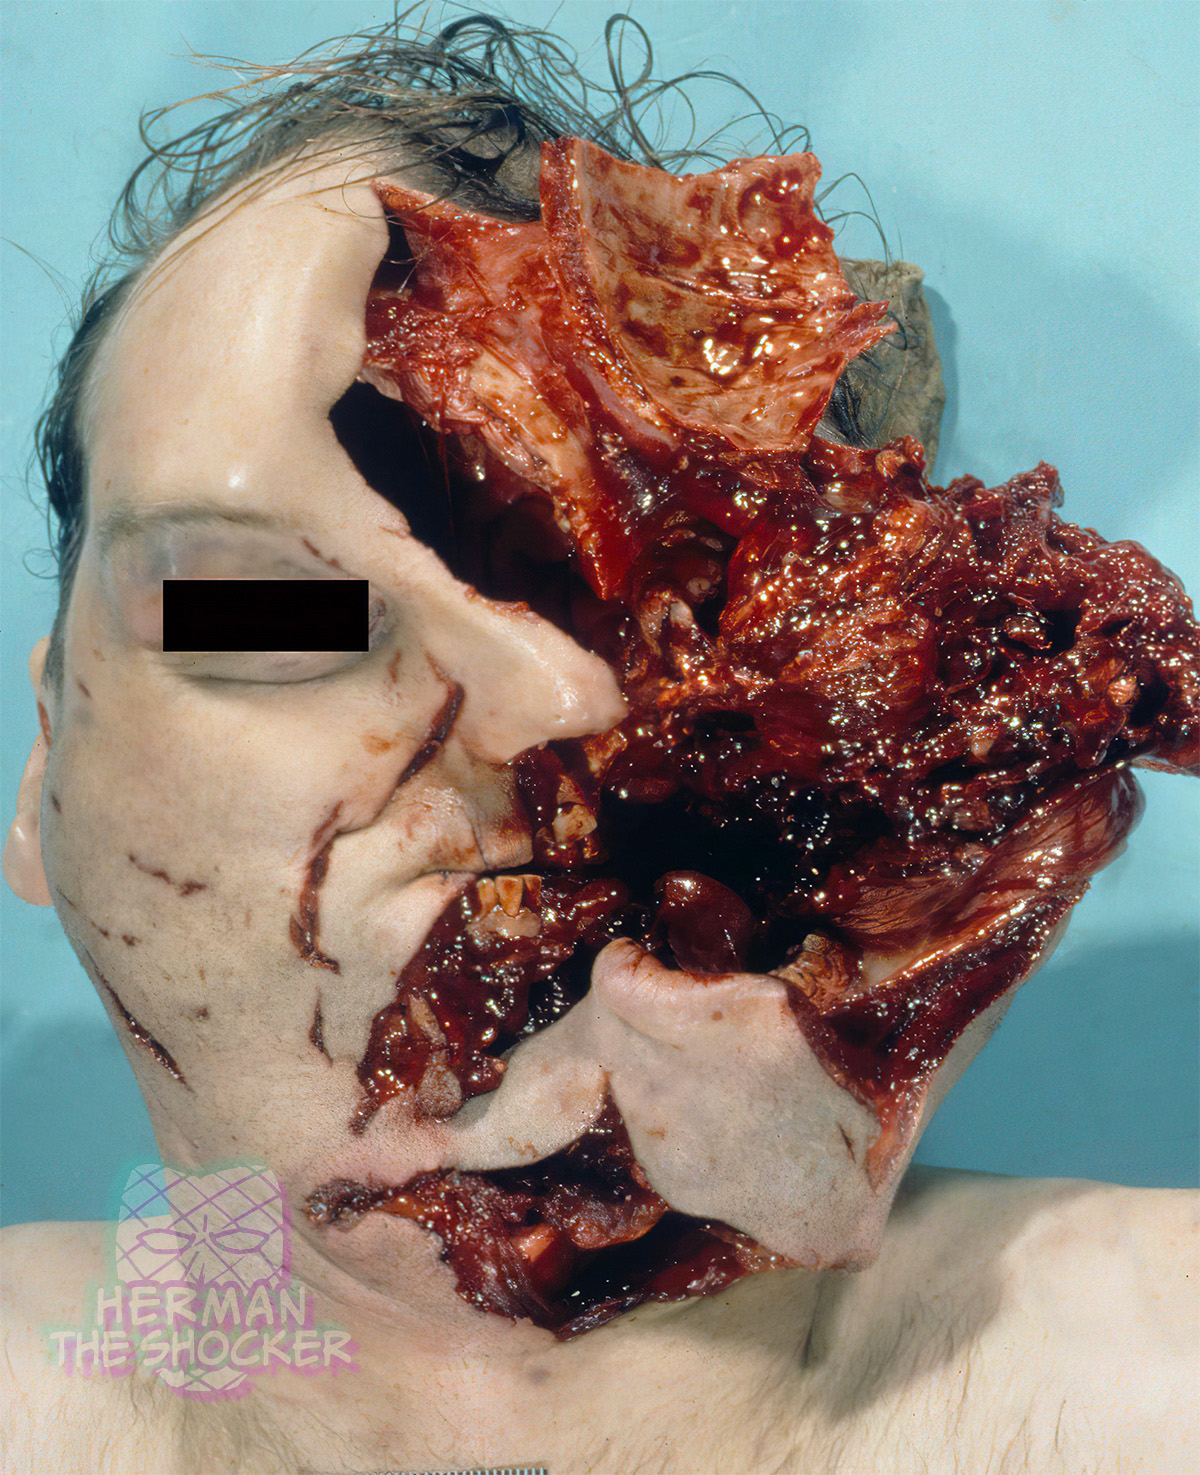 A contact shotgun wound of the lower chin